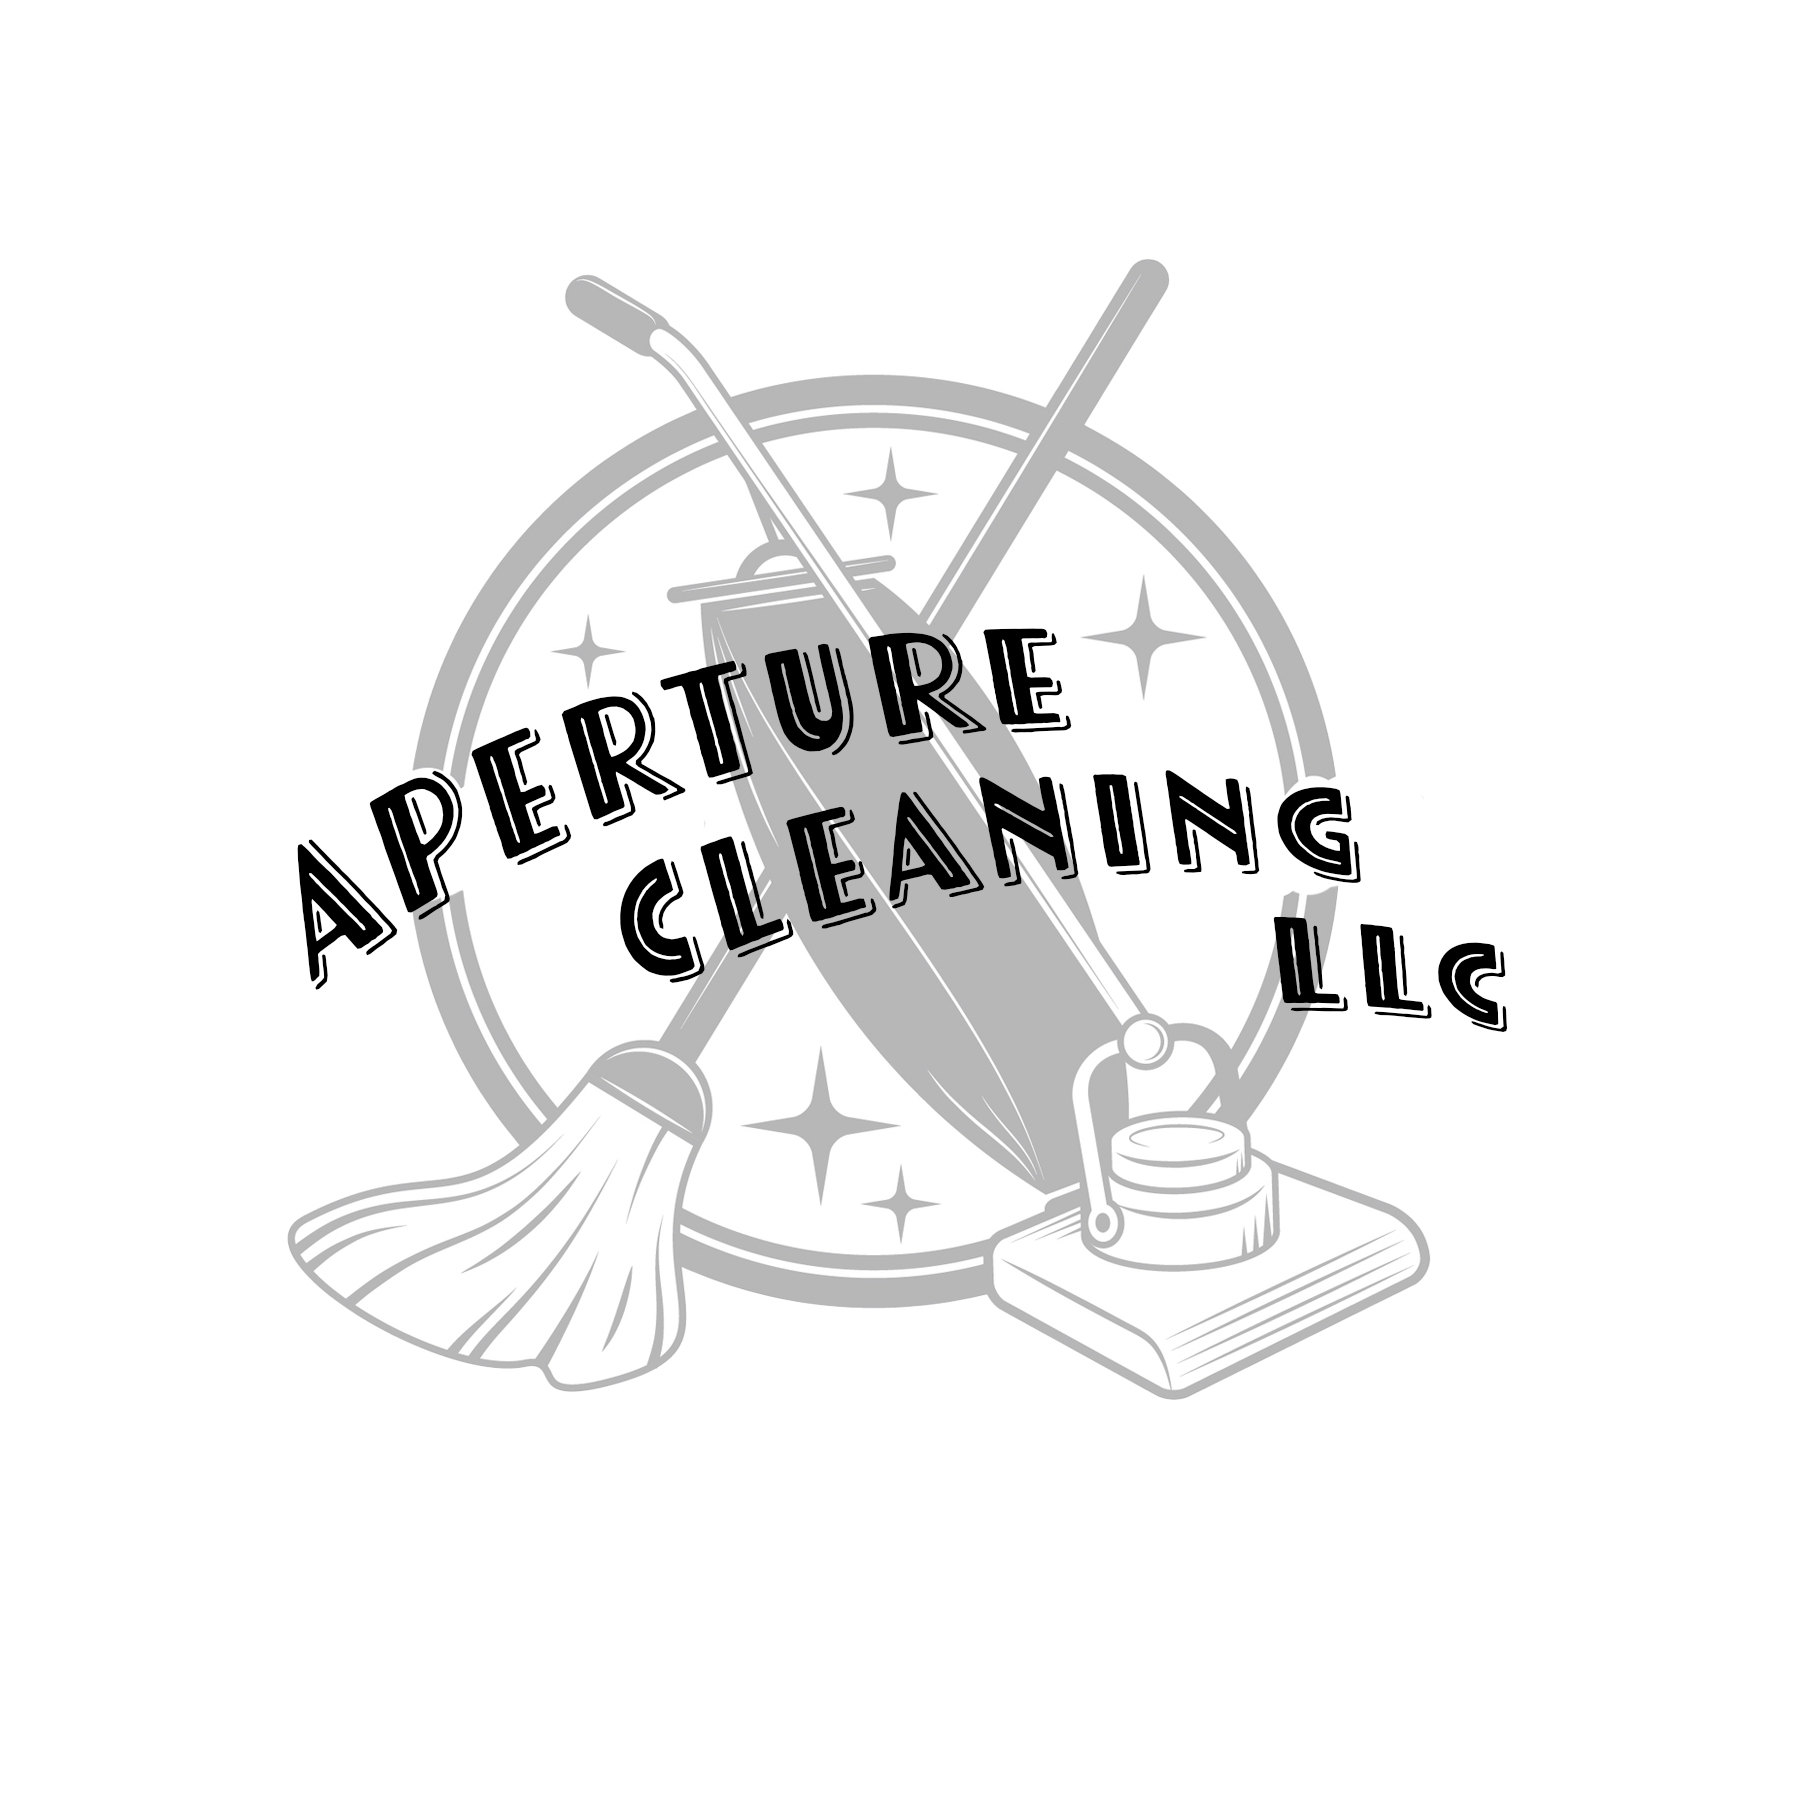 Aperture Cleaning Logo